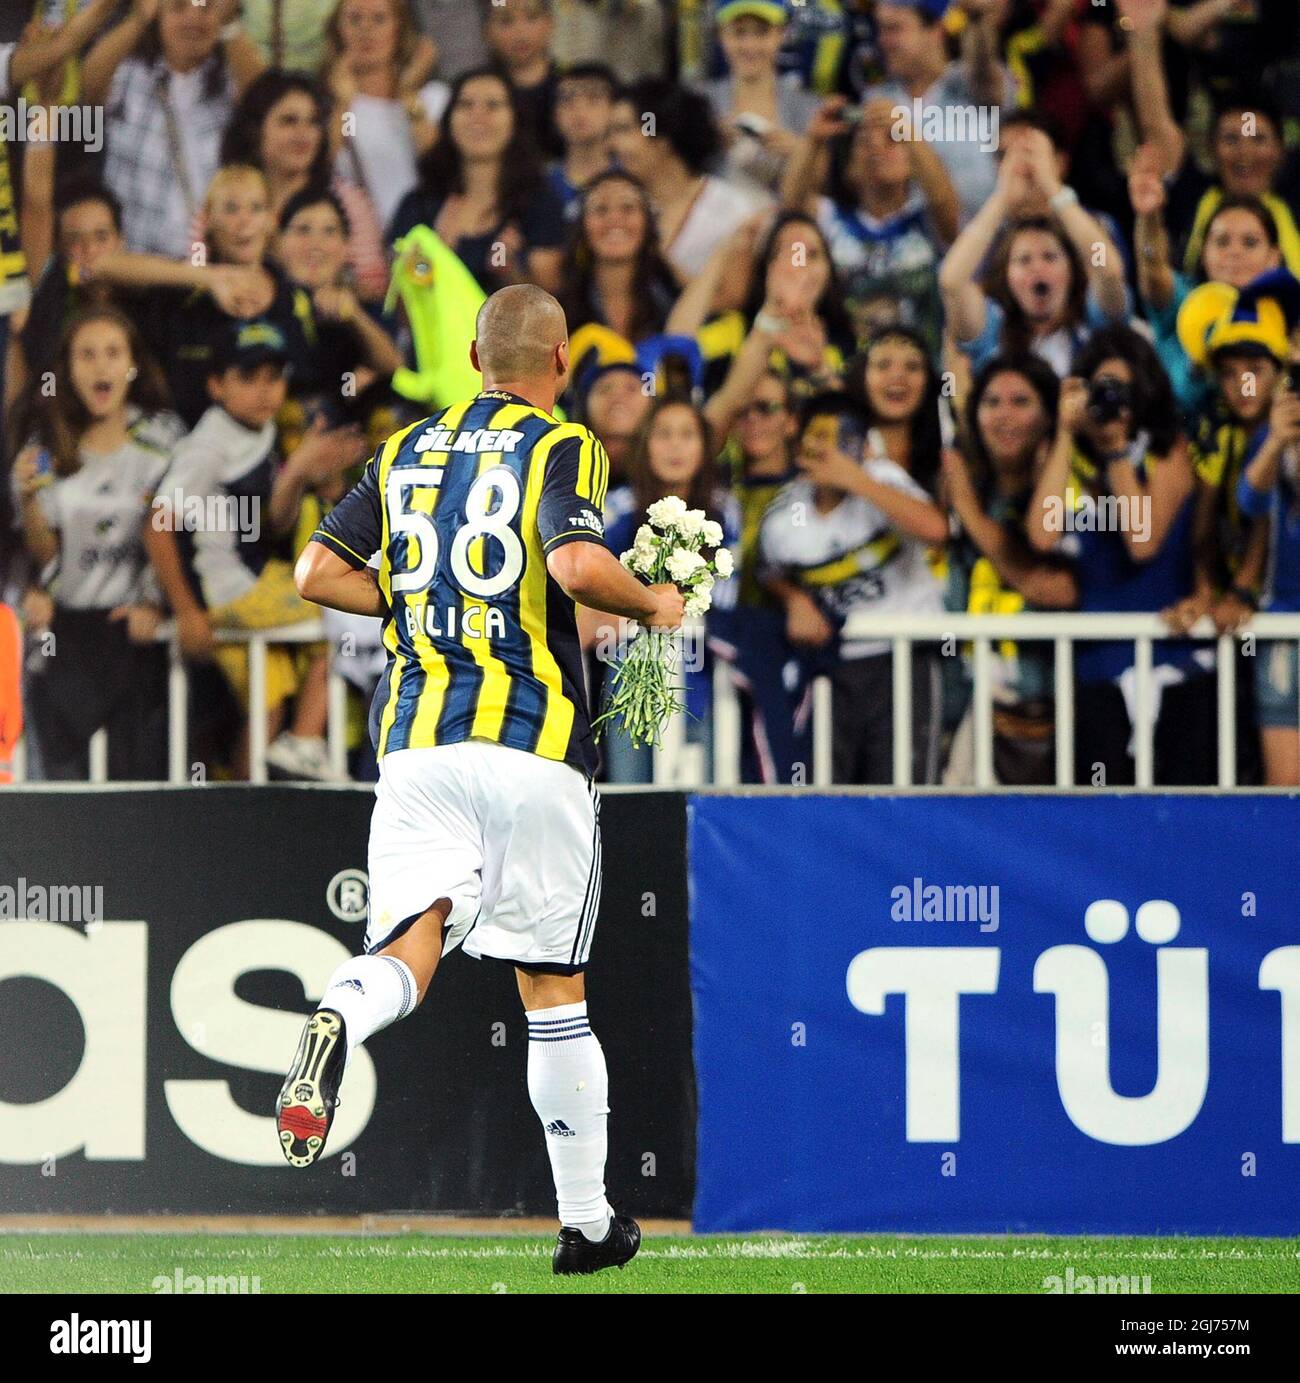 ISTANBUL 2011-09-20 Fenerbahce's Bilica. More than 41,000 women and children filled Sukru Saracoglu Stadium to watch Fenerbahce play against Manisapor in Turkish League soccer match in Istanbul, Turkey, Tuesday, Sept. 20. 2011. Turkey came up with a radical solution for tackling crowd violence at football matches ban the men and let only women and children in. Under new rules approved by Turkey's football association, only women and children under the age of 12 will be admitted to watch games for free involving teams which have been sanctioned for unruly behavior by their fans. Fenerbahce was  Stock Photo